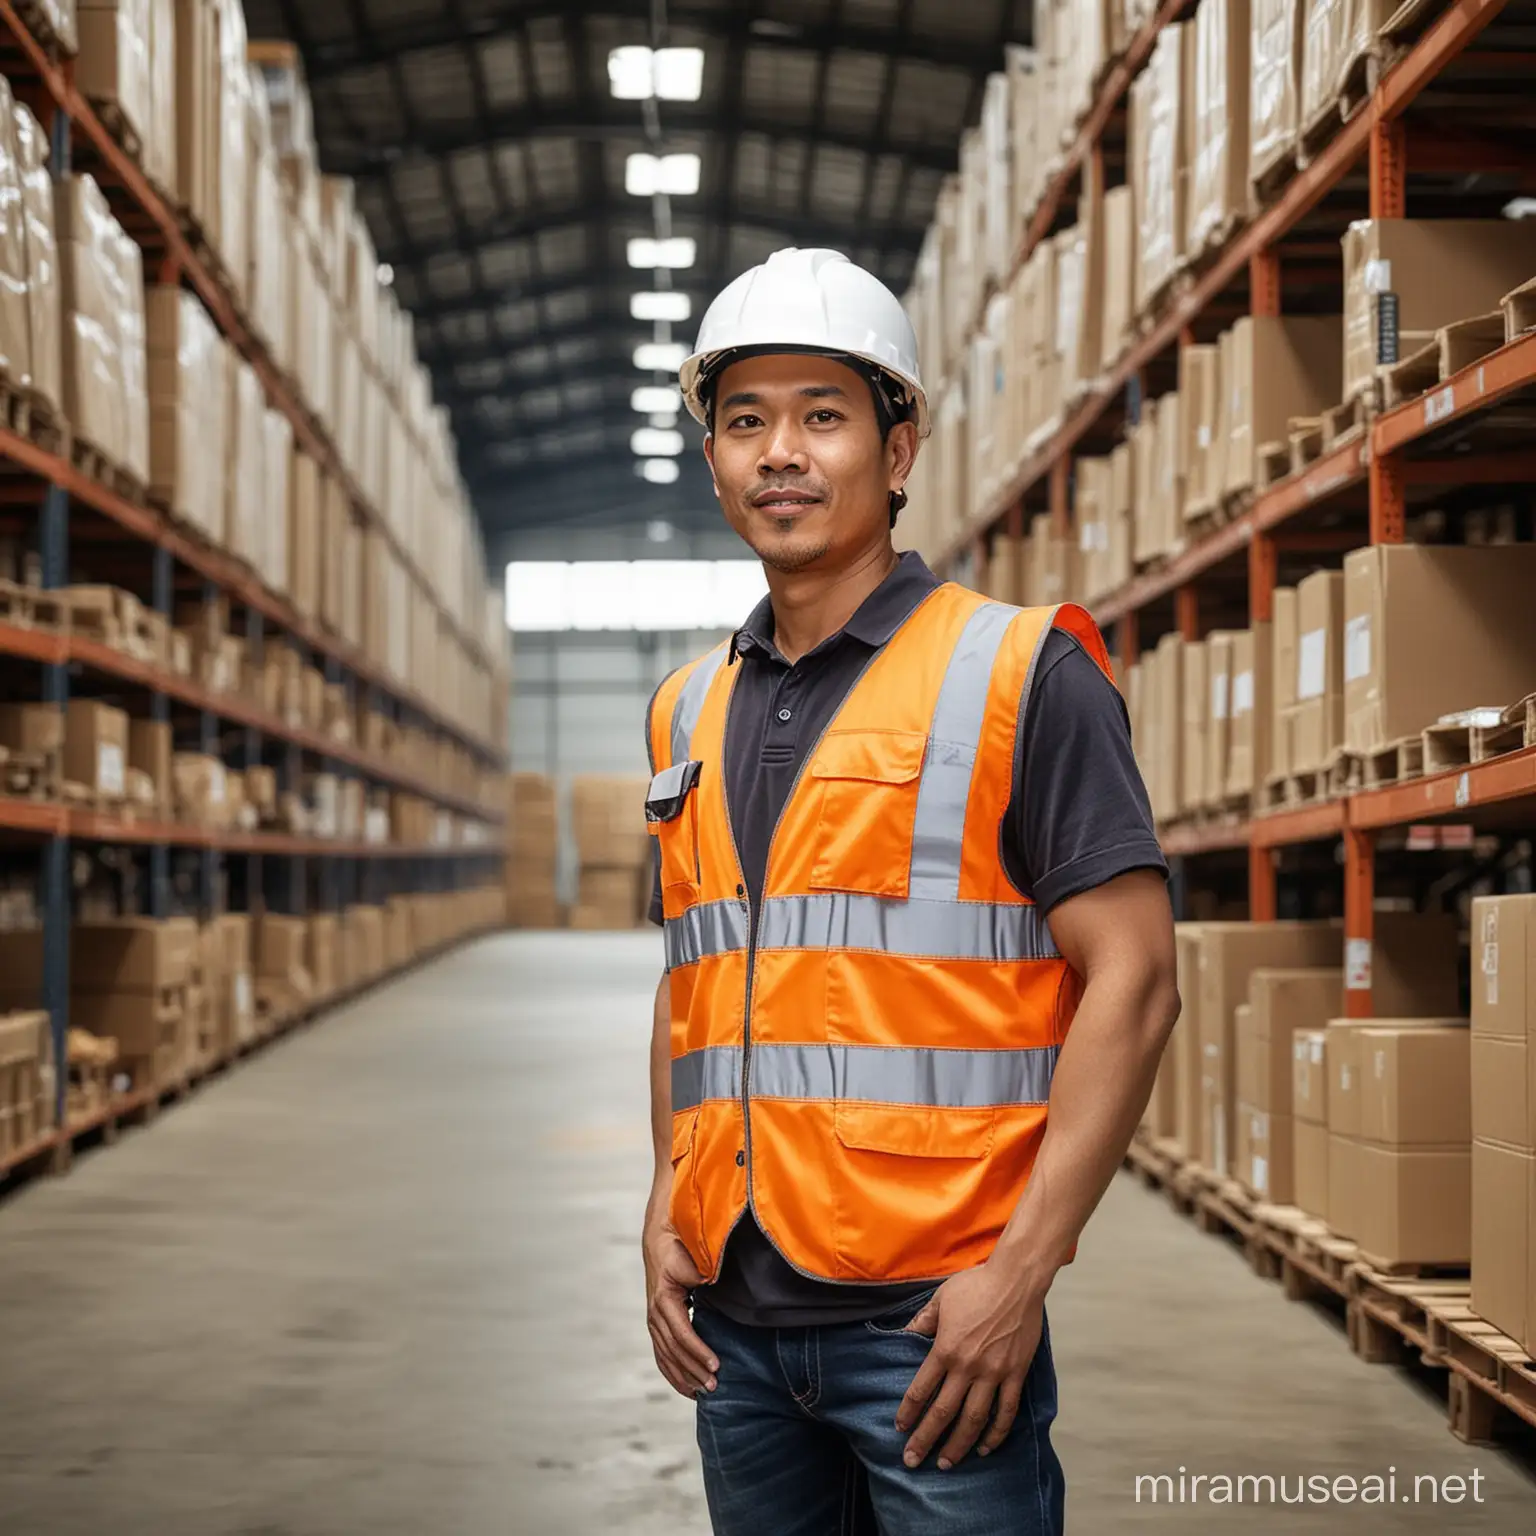 Professional Indonesian Warehouse Worker in Safety Gear